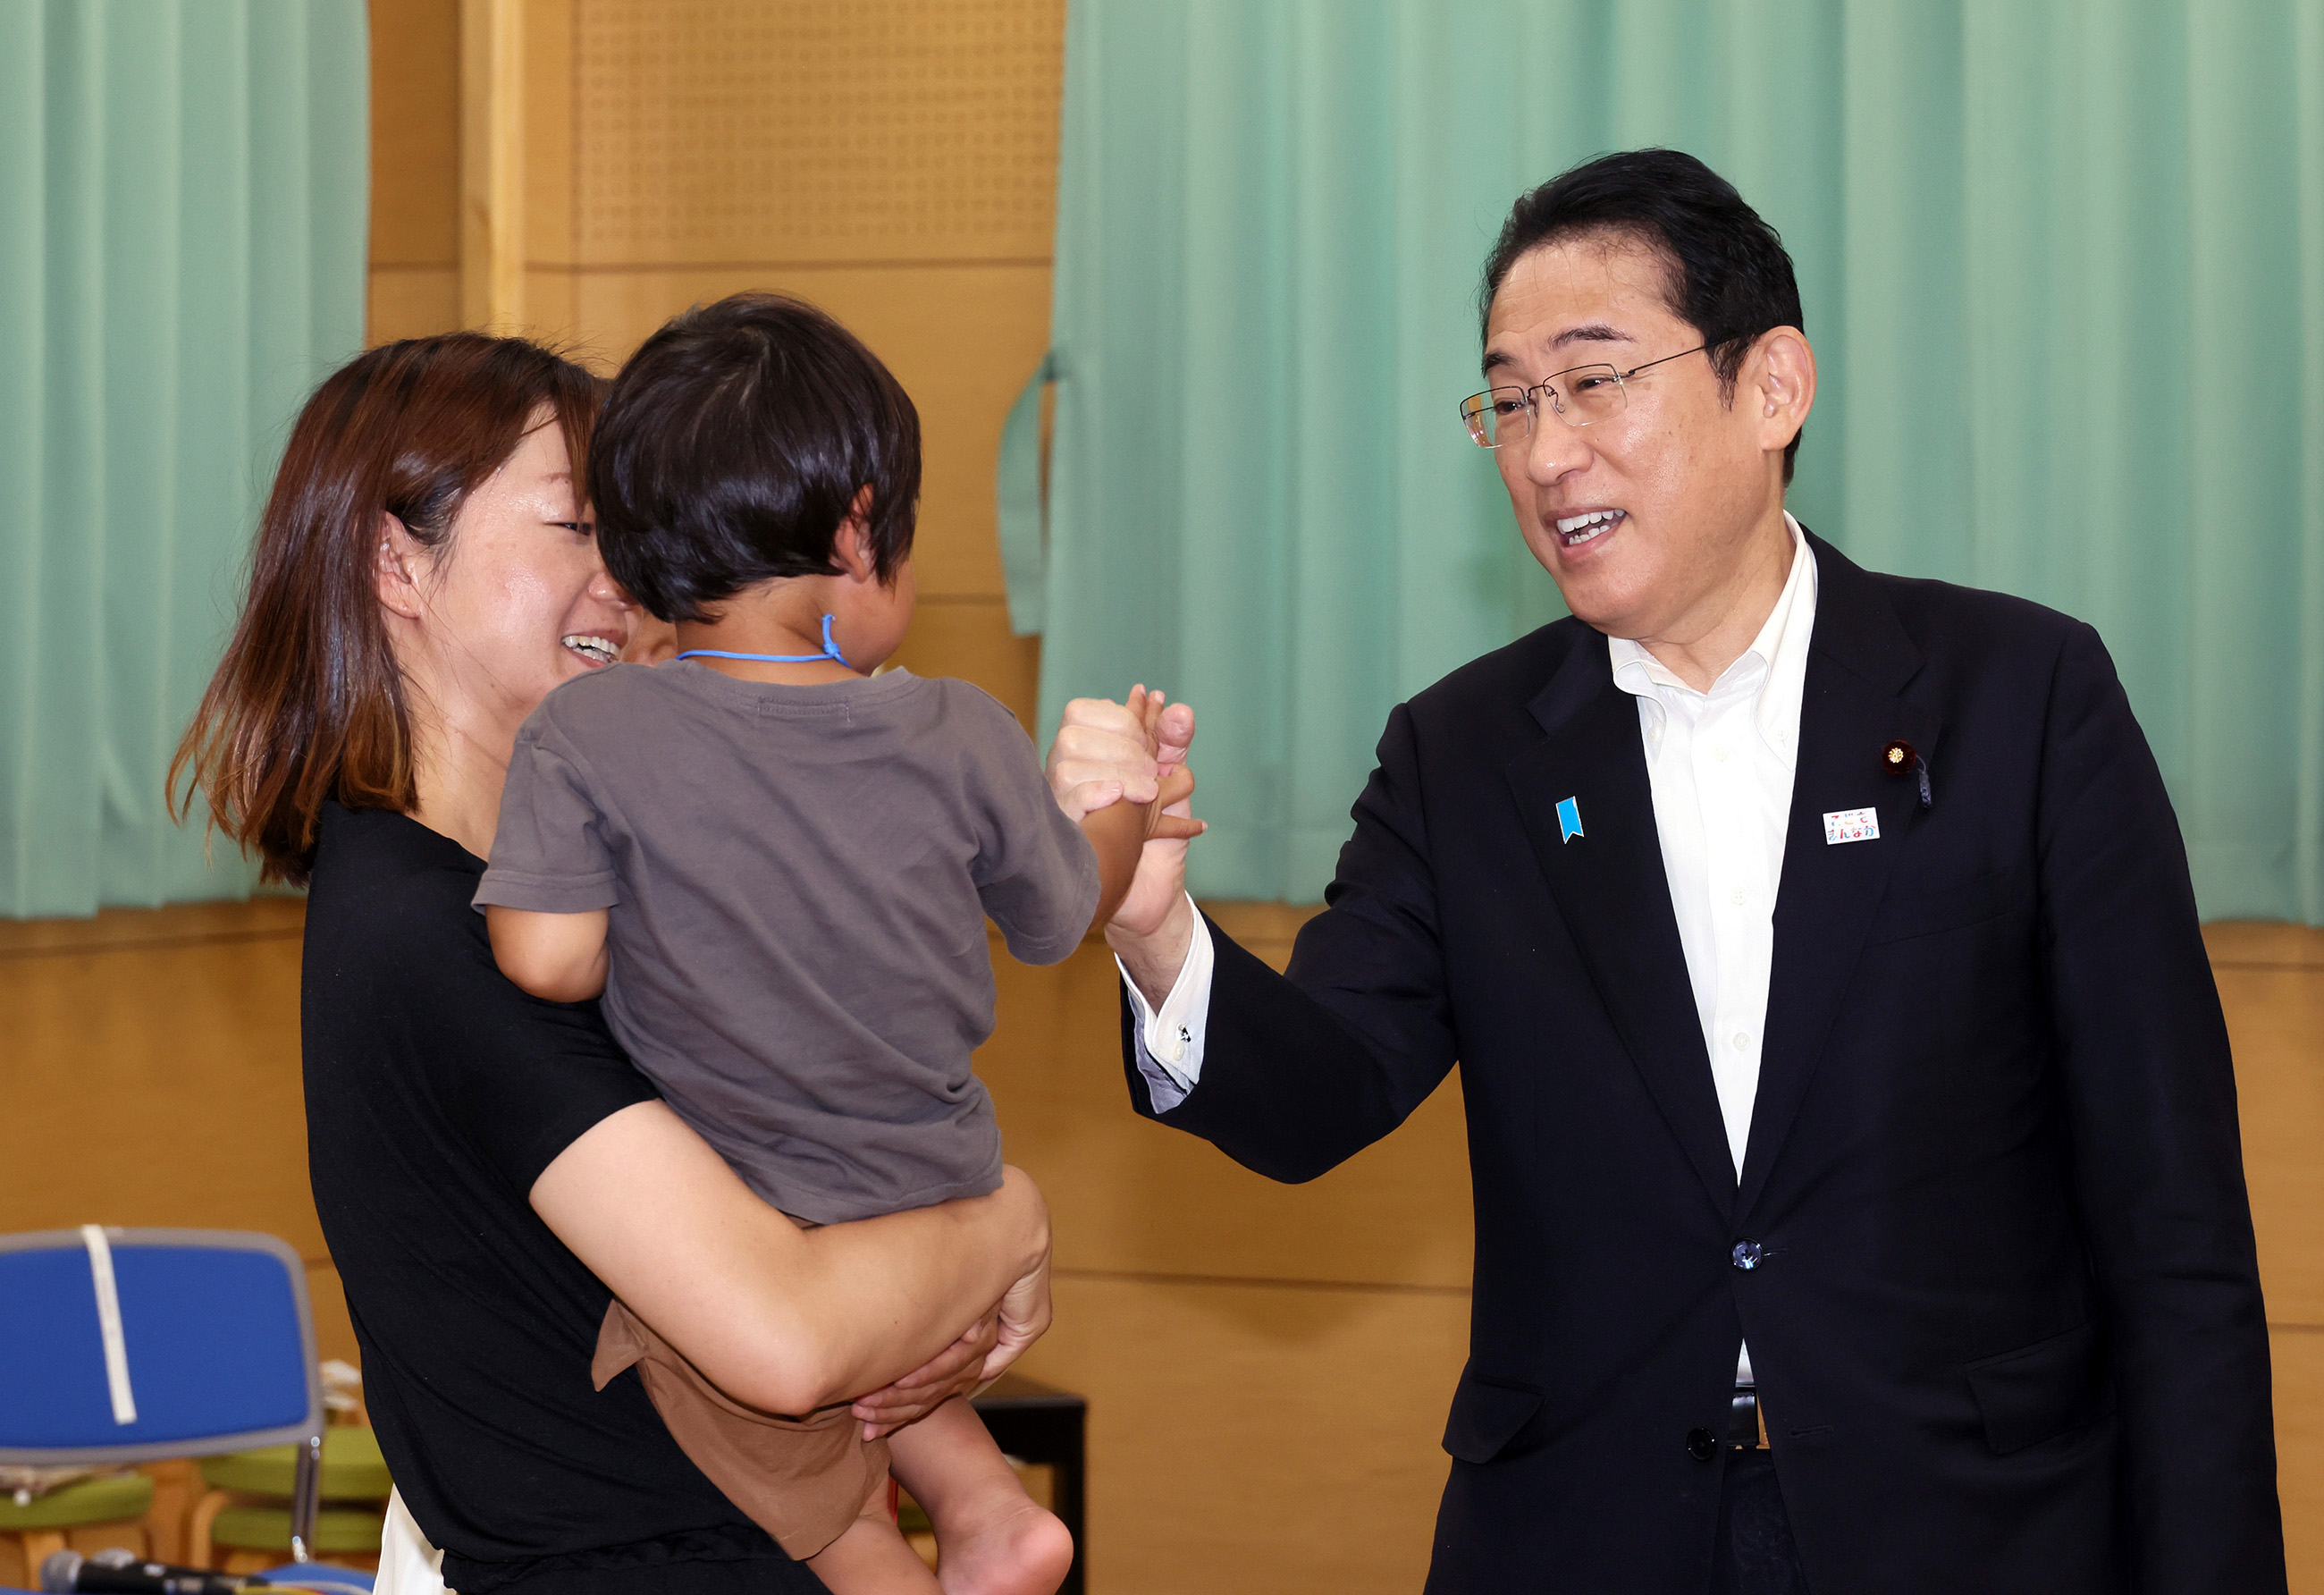 Prime Minister Kishida talking with participants of a public dialogue on policies related to children (8)